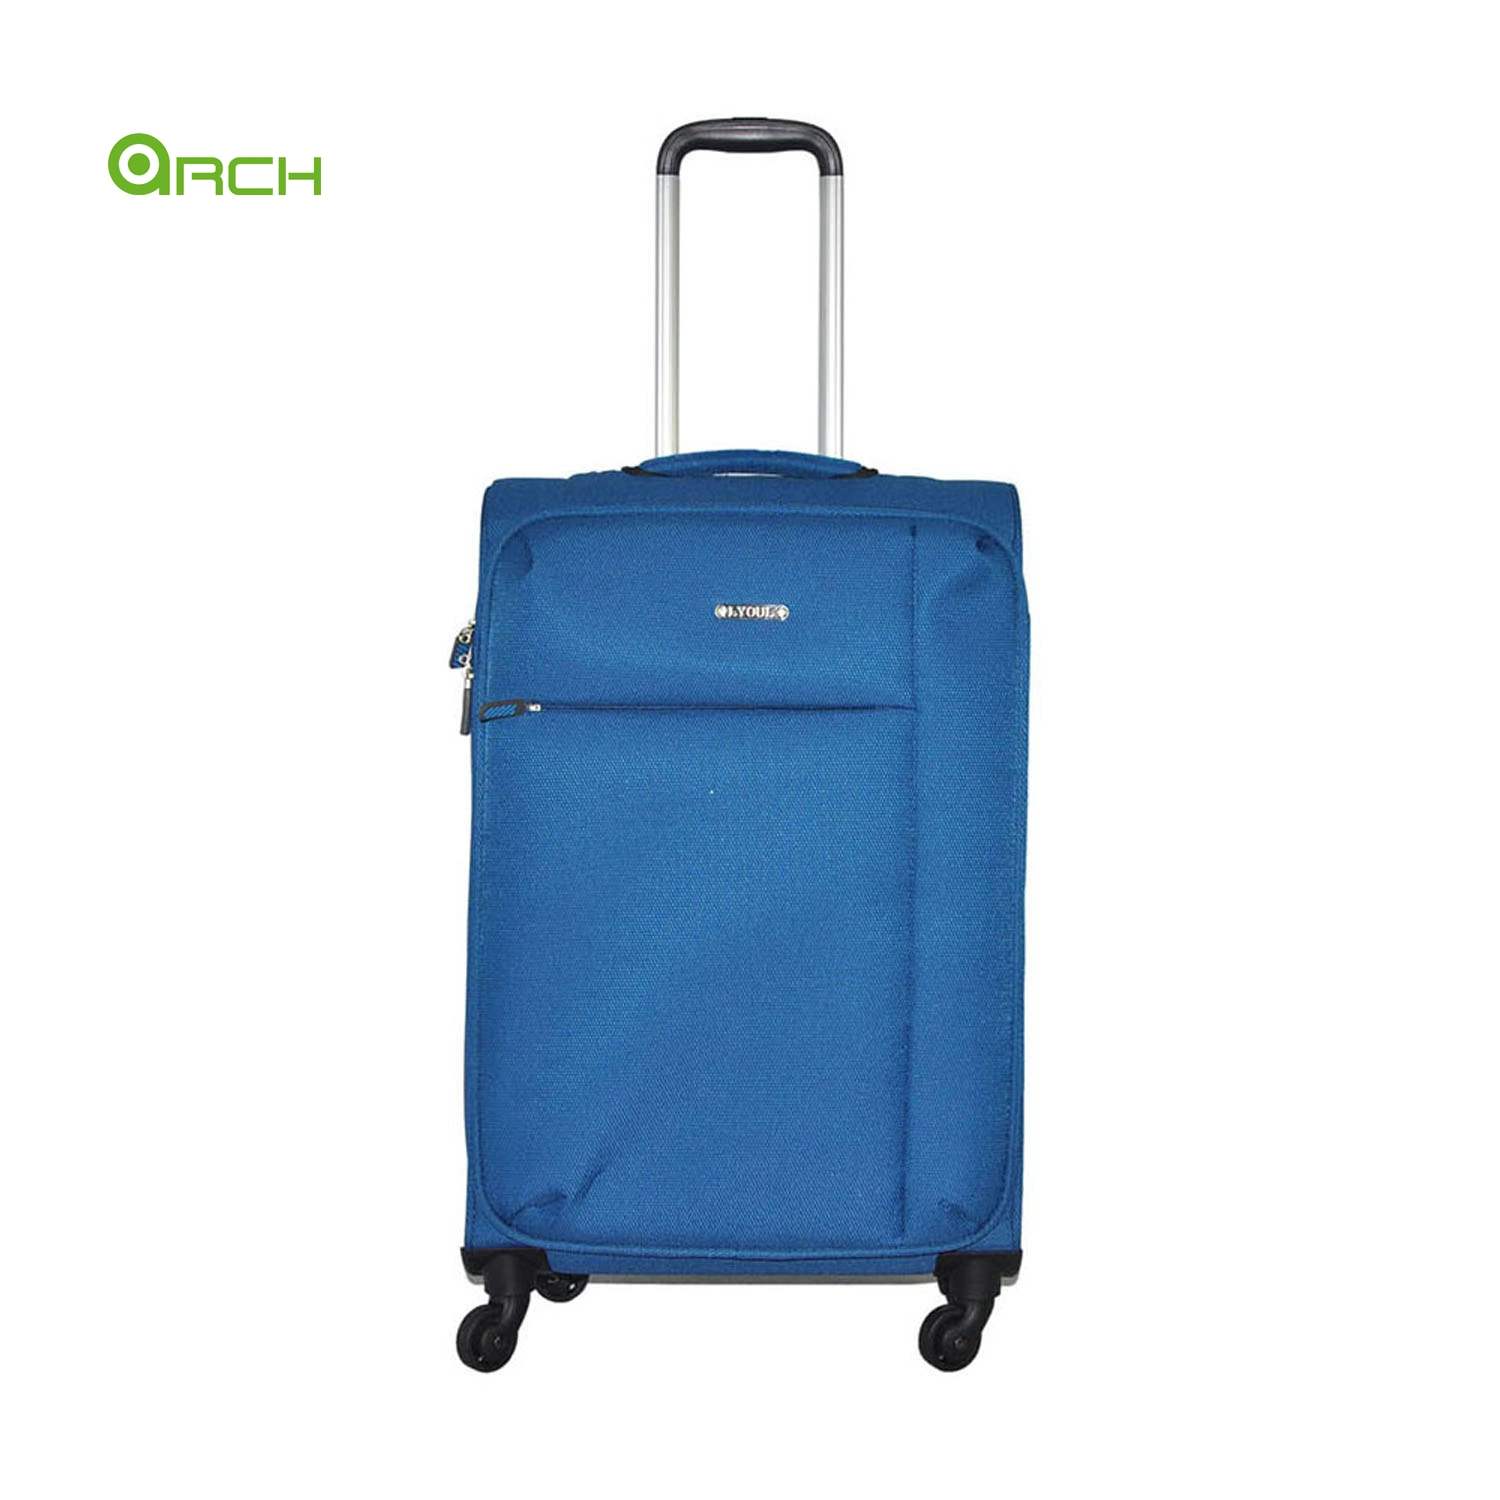 20" 24" 28" 3PCS Set Light Weight Trolley Case Travel Luggage with Digital Scale